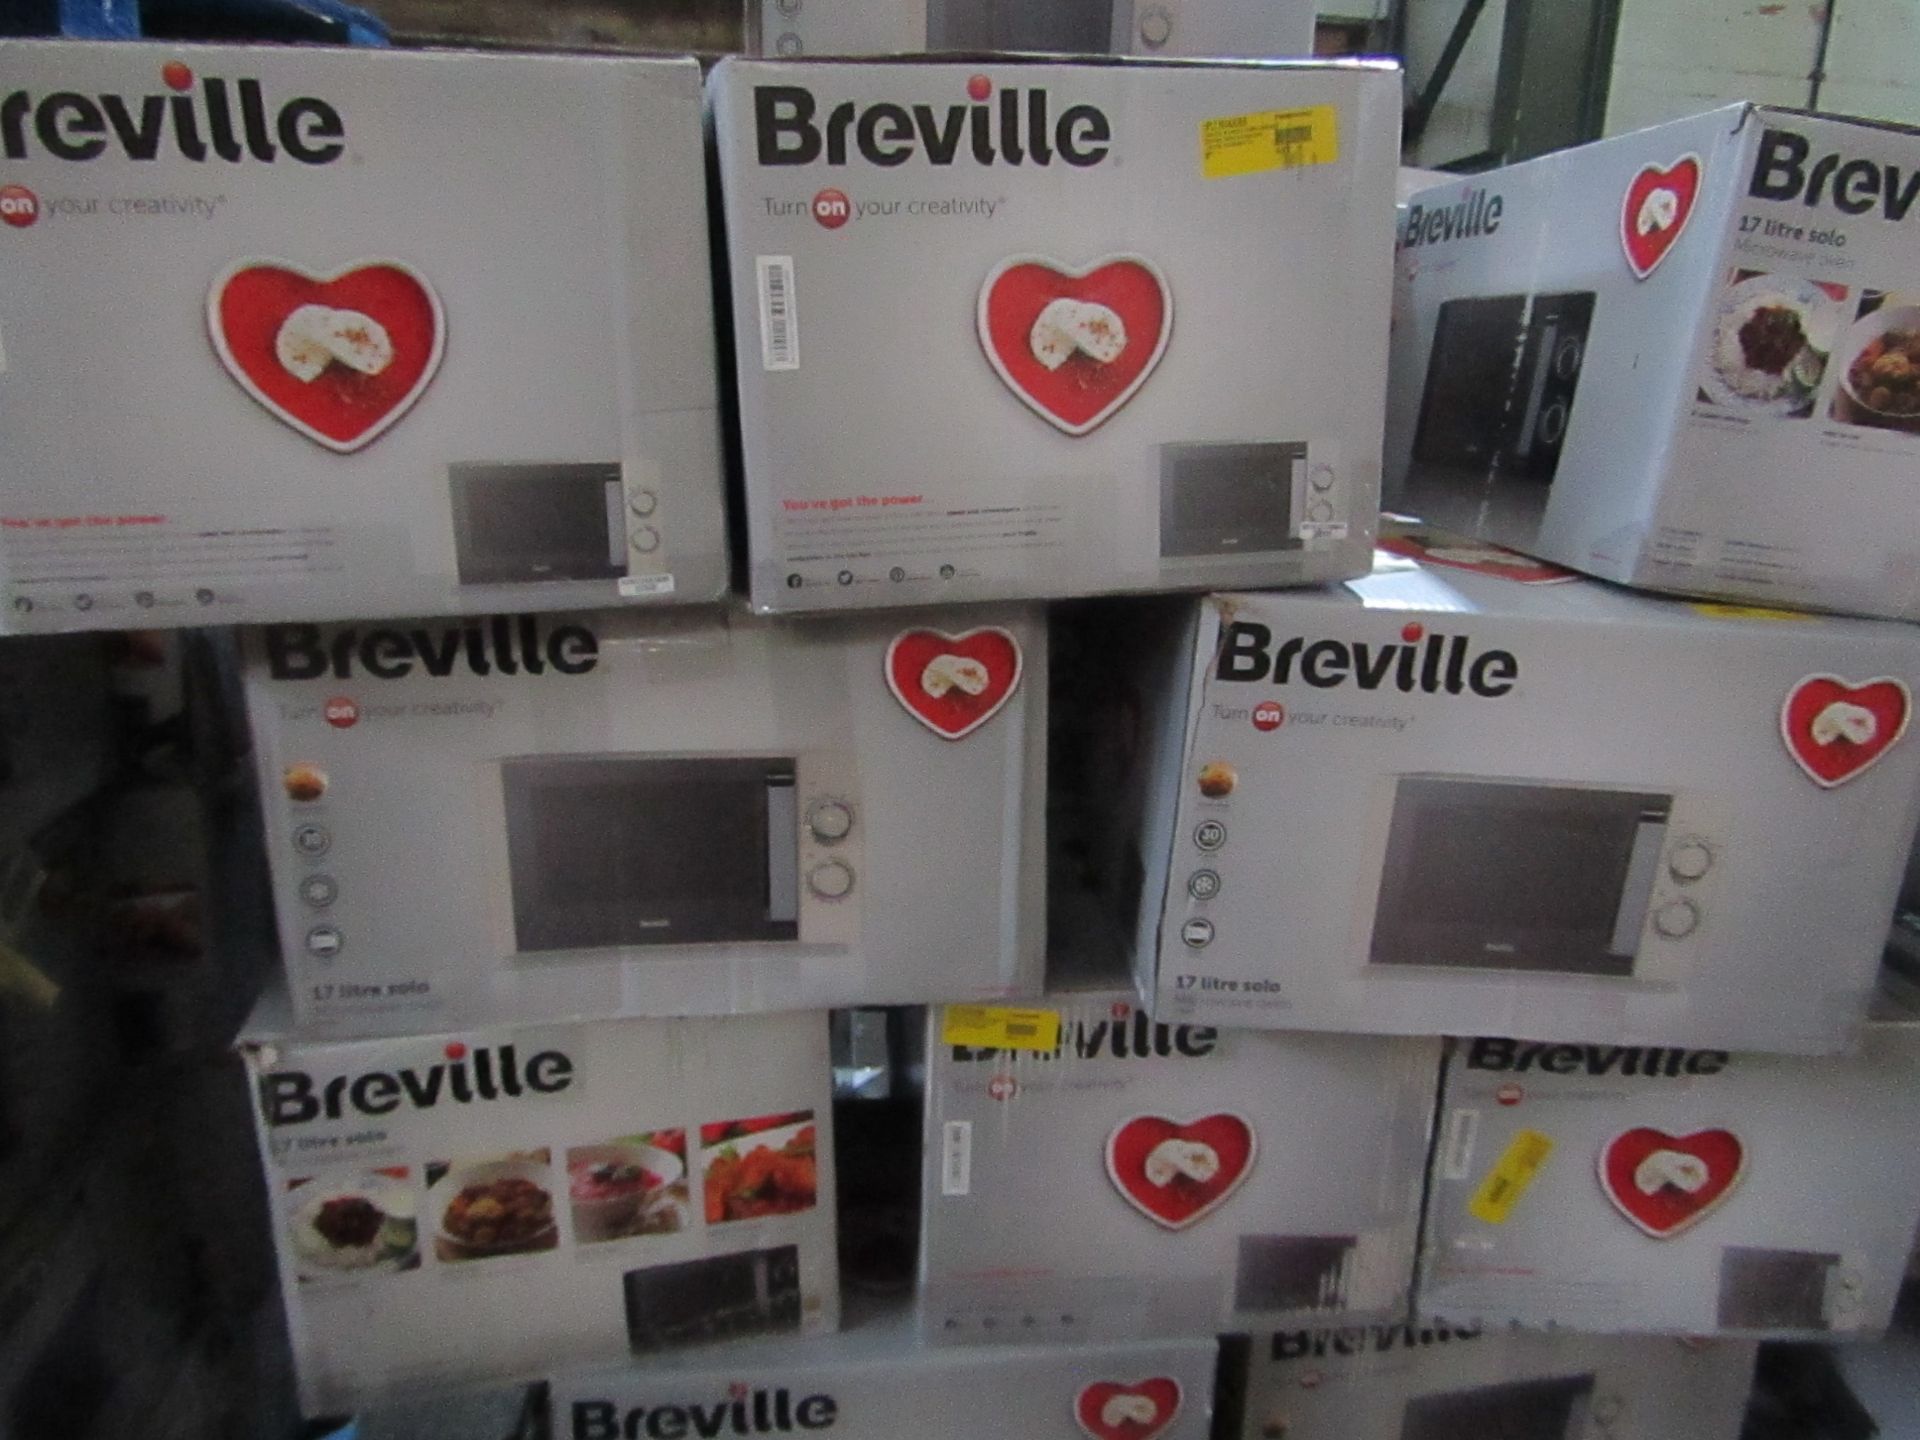 | 5X | BREVILLE MICROWAVE OVEN | UNCHECKED | NO ONLINE RESALE | RRP ?60 | TOTAL LOT RRP ?300 |